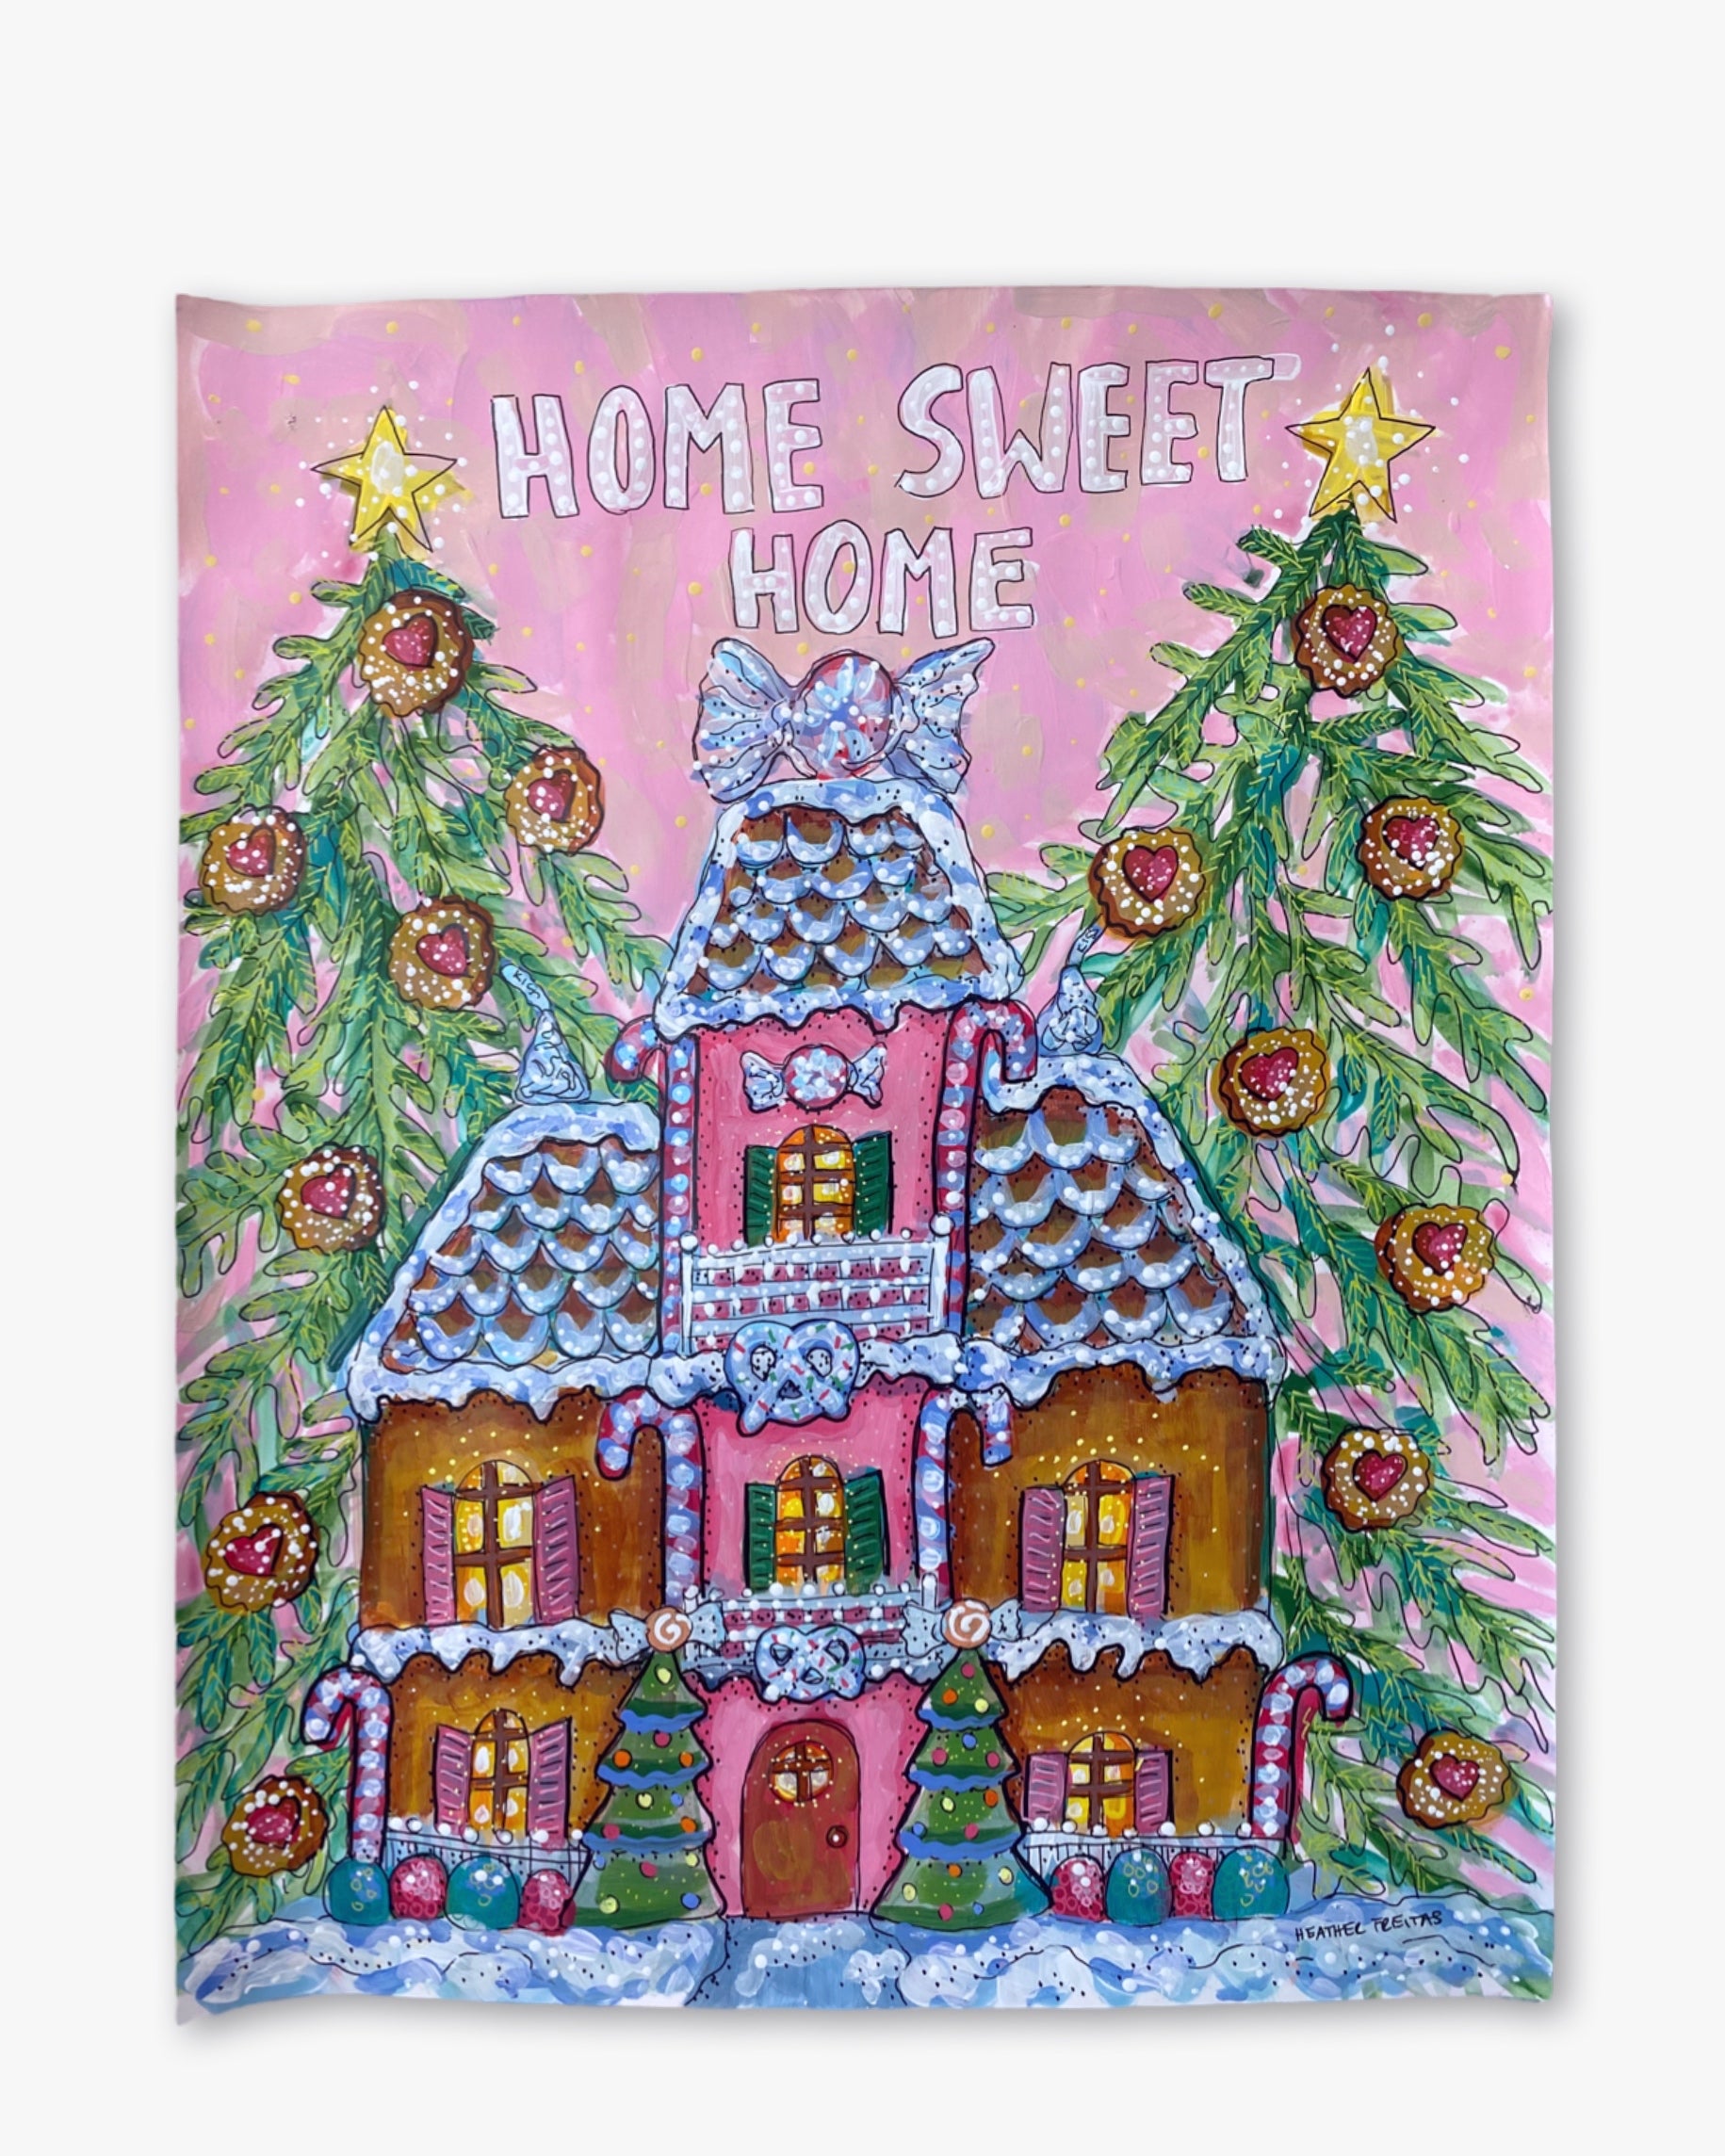 Home Sweet Gingerbread Home ( Original Painting )